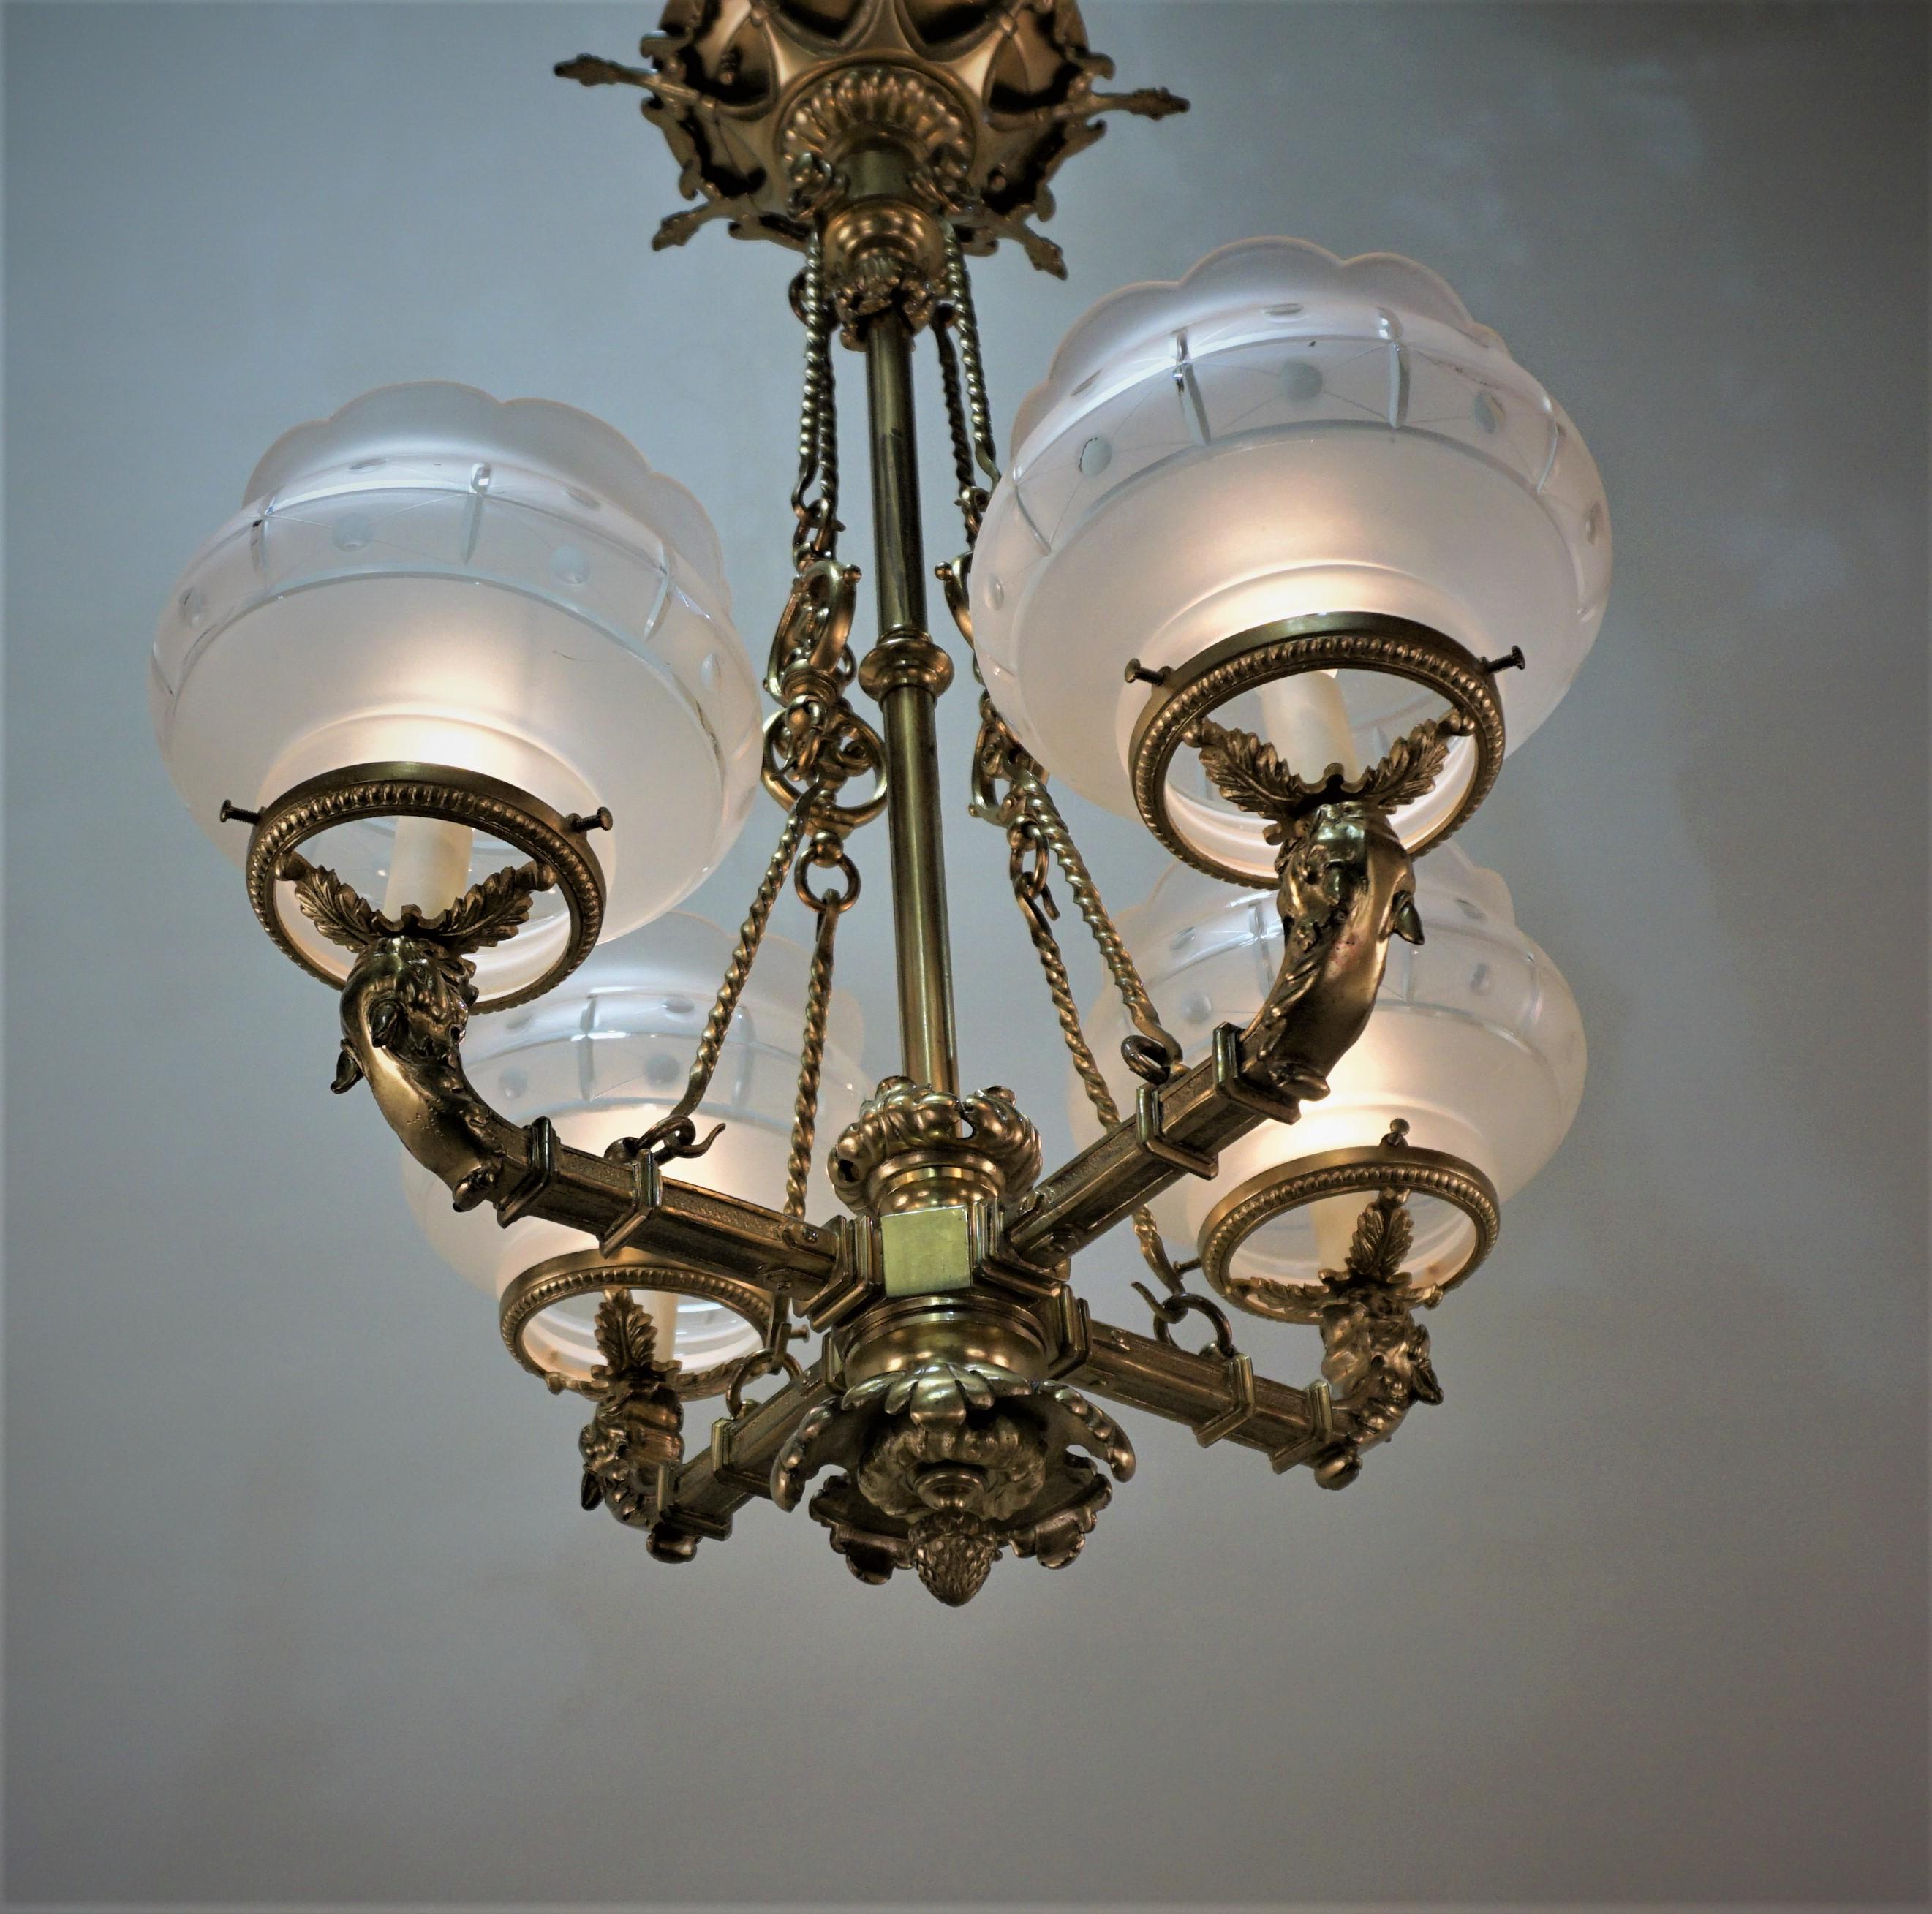 19th century beautiful heavy cast bronze four light gas chandelier with cut glass shades.